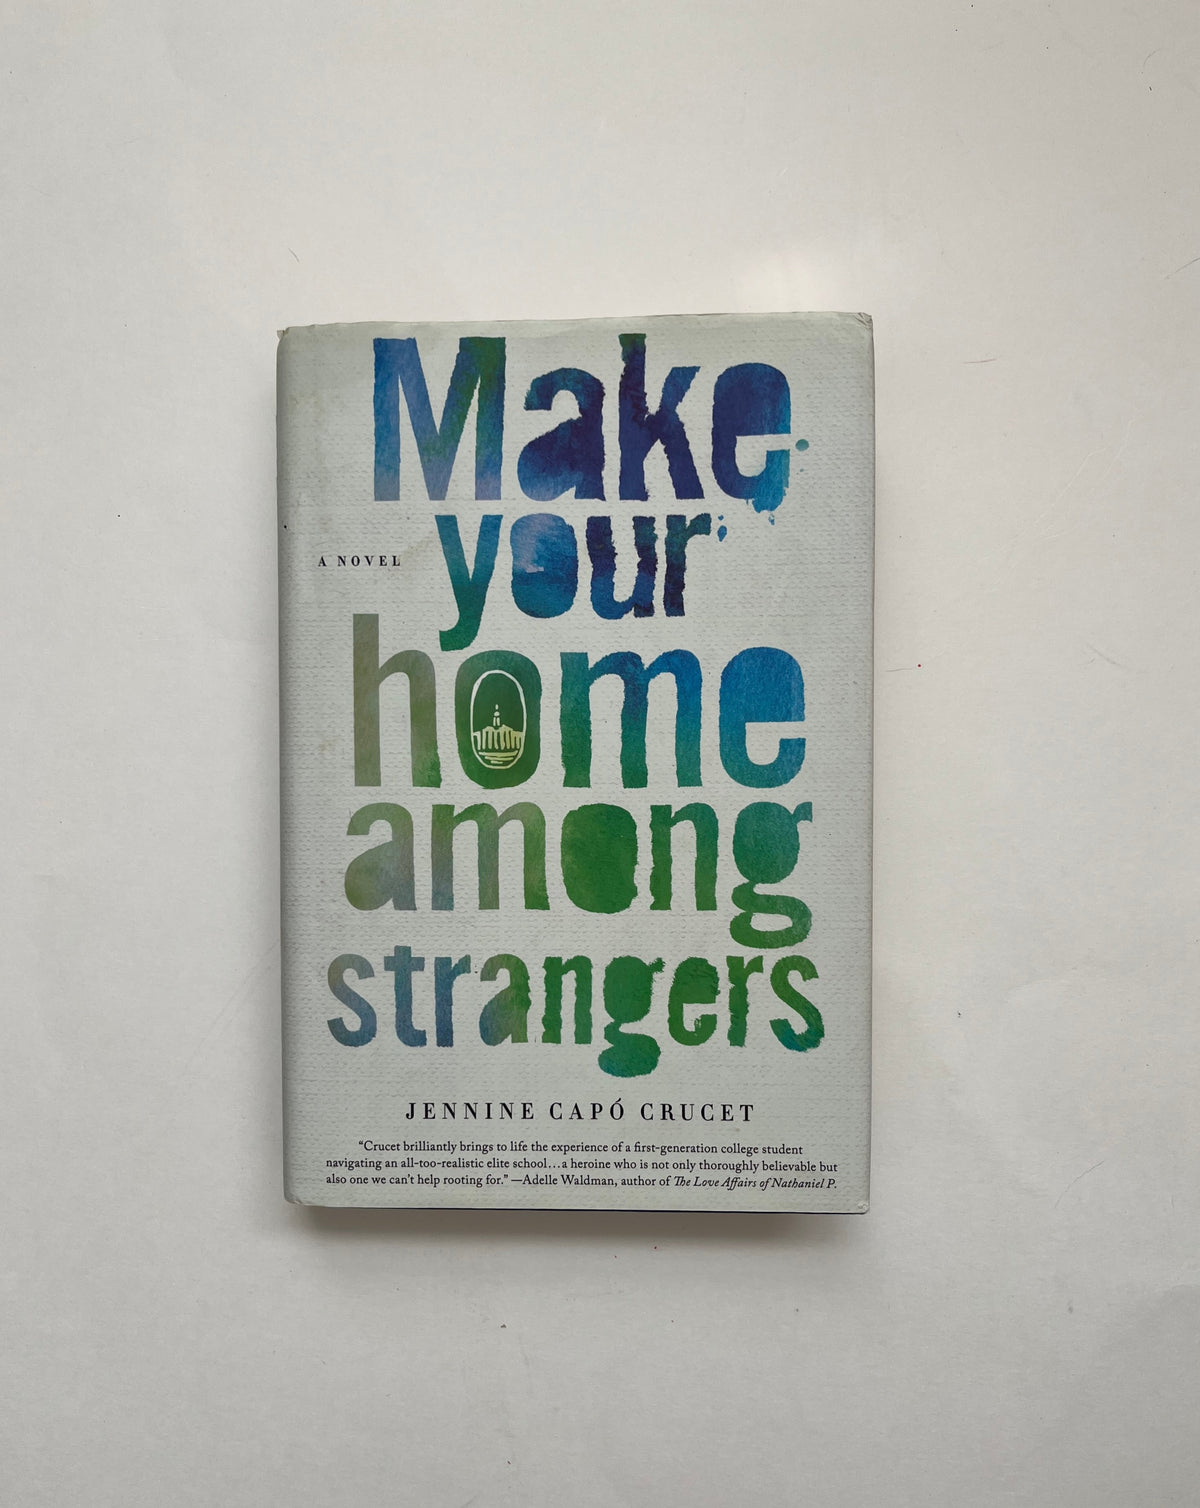 Make Your Home Among Strangers by Jennine Capo Crucet